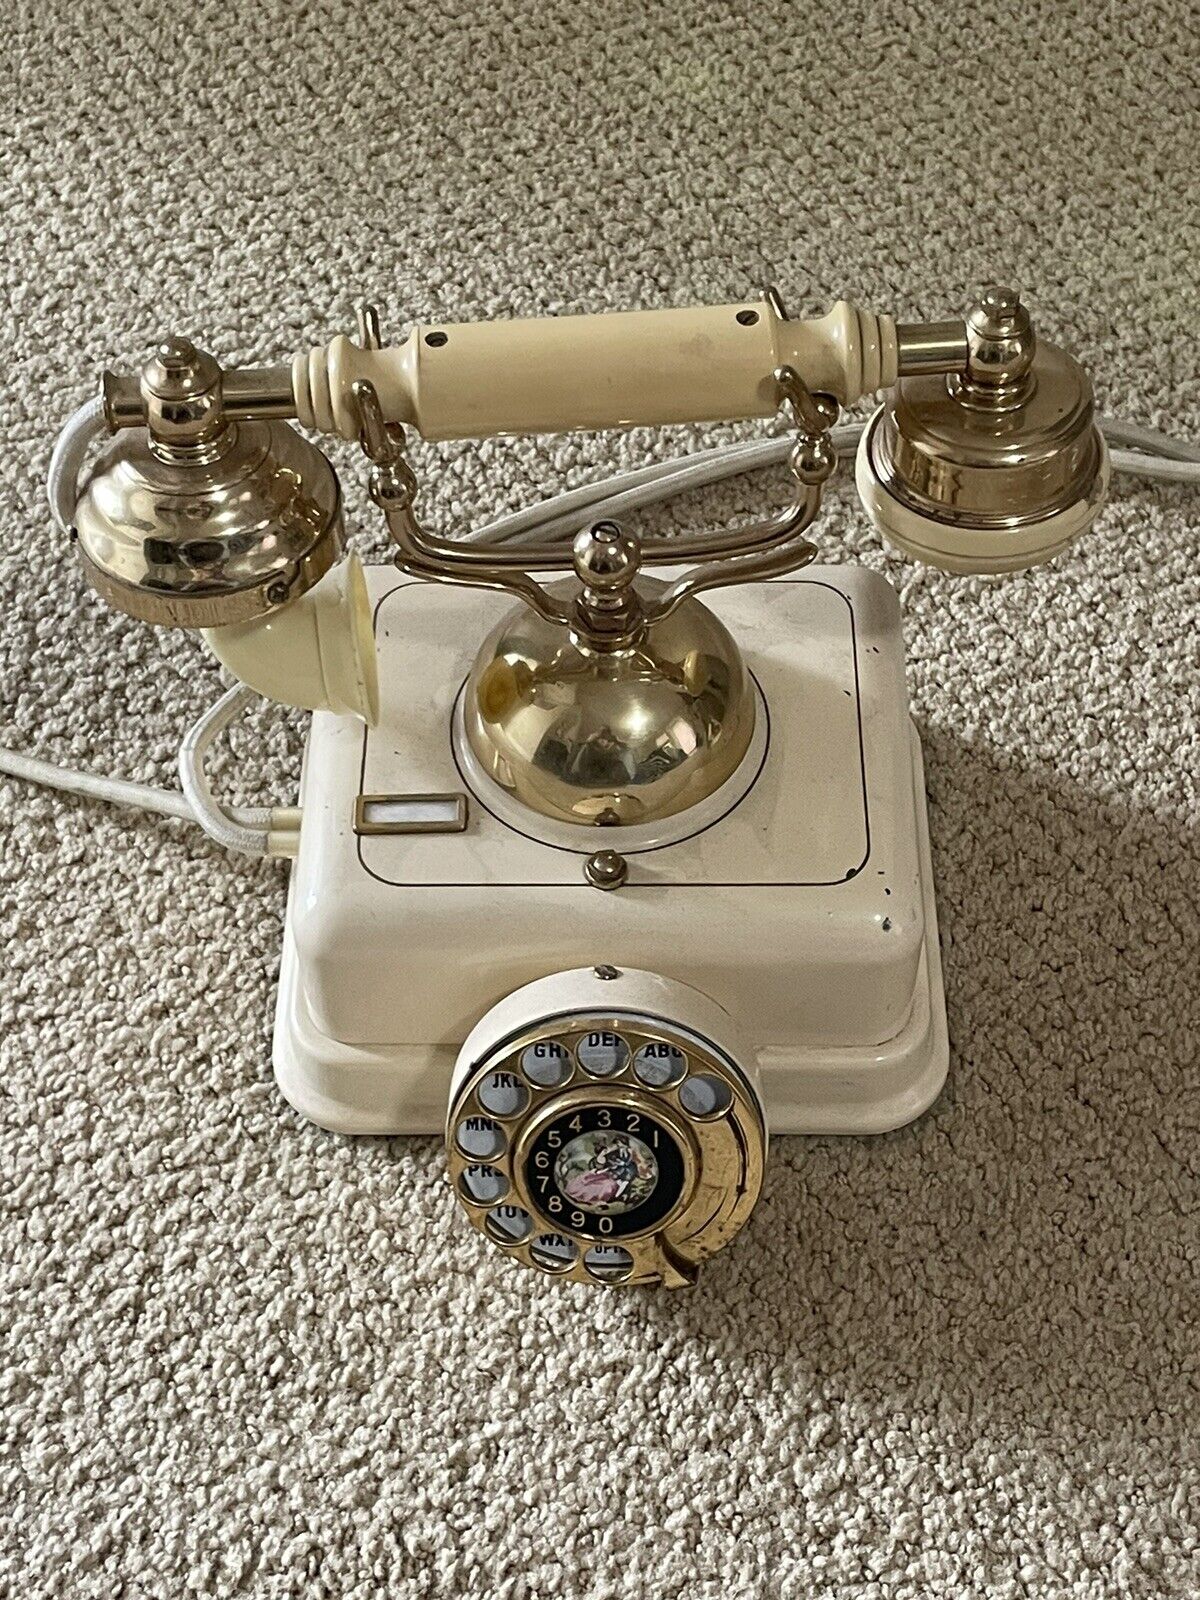 Vintage Rotary Dial Telephone OLD FASHION Style IVORY Desk Phone WORKS